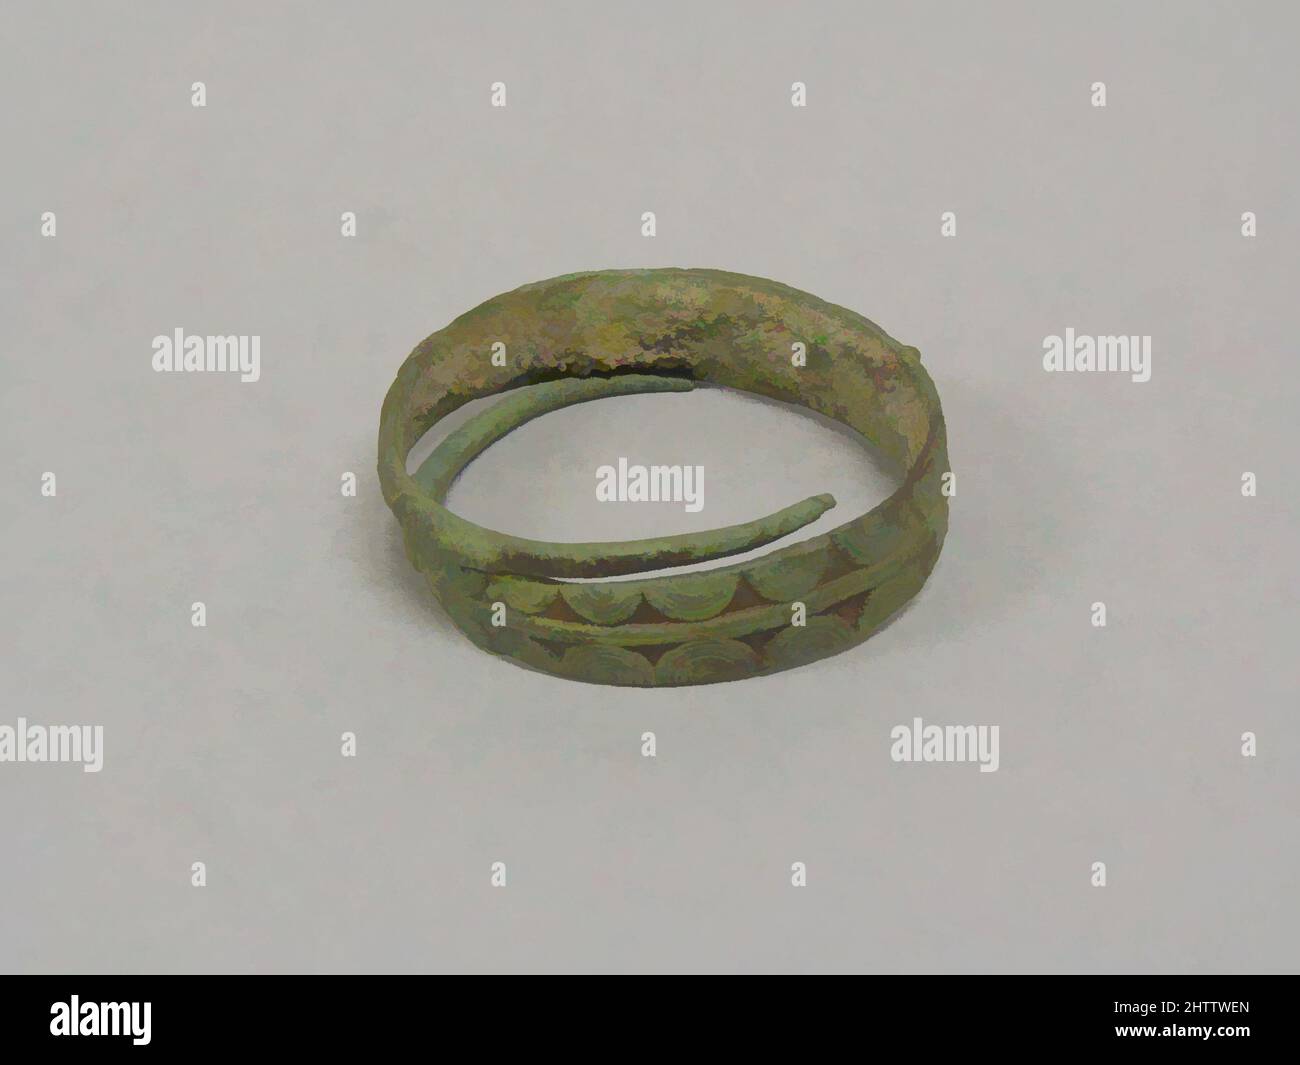 Art inspired by Overlapping Bangle, Late period, 300 B.C.–A.D. 400, Thailand, Bronze, W. 2 5/16 in. (5.9 cm); D. 2 1/16 in. (5.2 cm), Jewelry, Classic works modernized by Artotop with a splash of modernity. Shapes, color and value, eye-catching visual impact on art. Emotions through freedom of artworks in a contemporary way. A timeless message pursuing a wildly creative new direction. Artists turning to the digital medium and creating the Artotop NFT Stock Photo